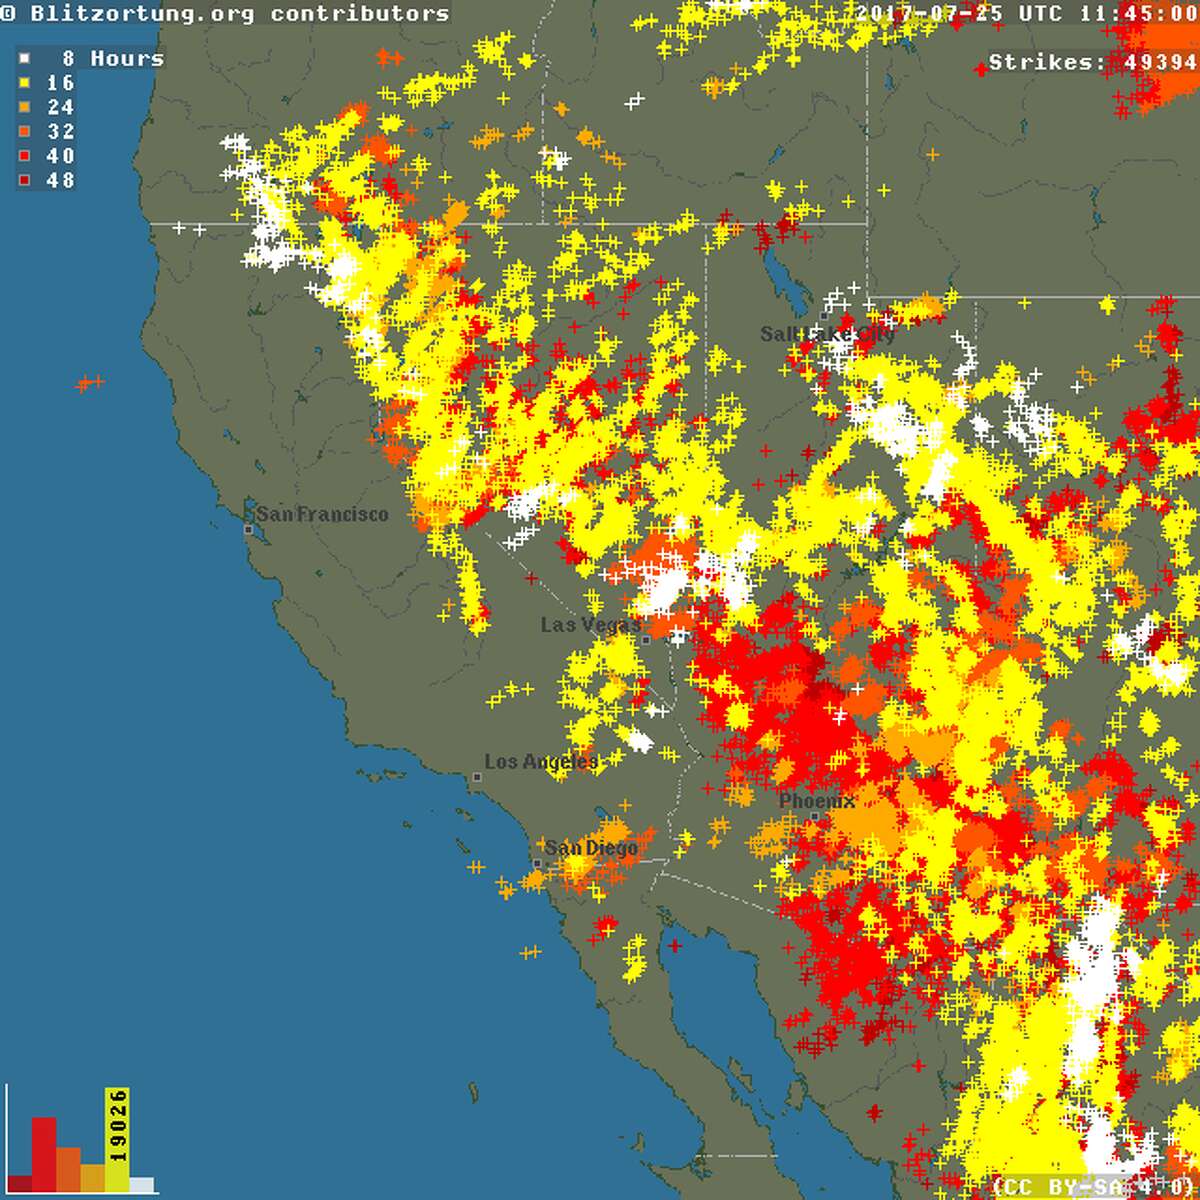 79 wildfires in Northern California in last 24 hours, most likely sparked  by lightning